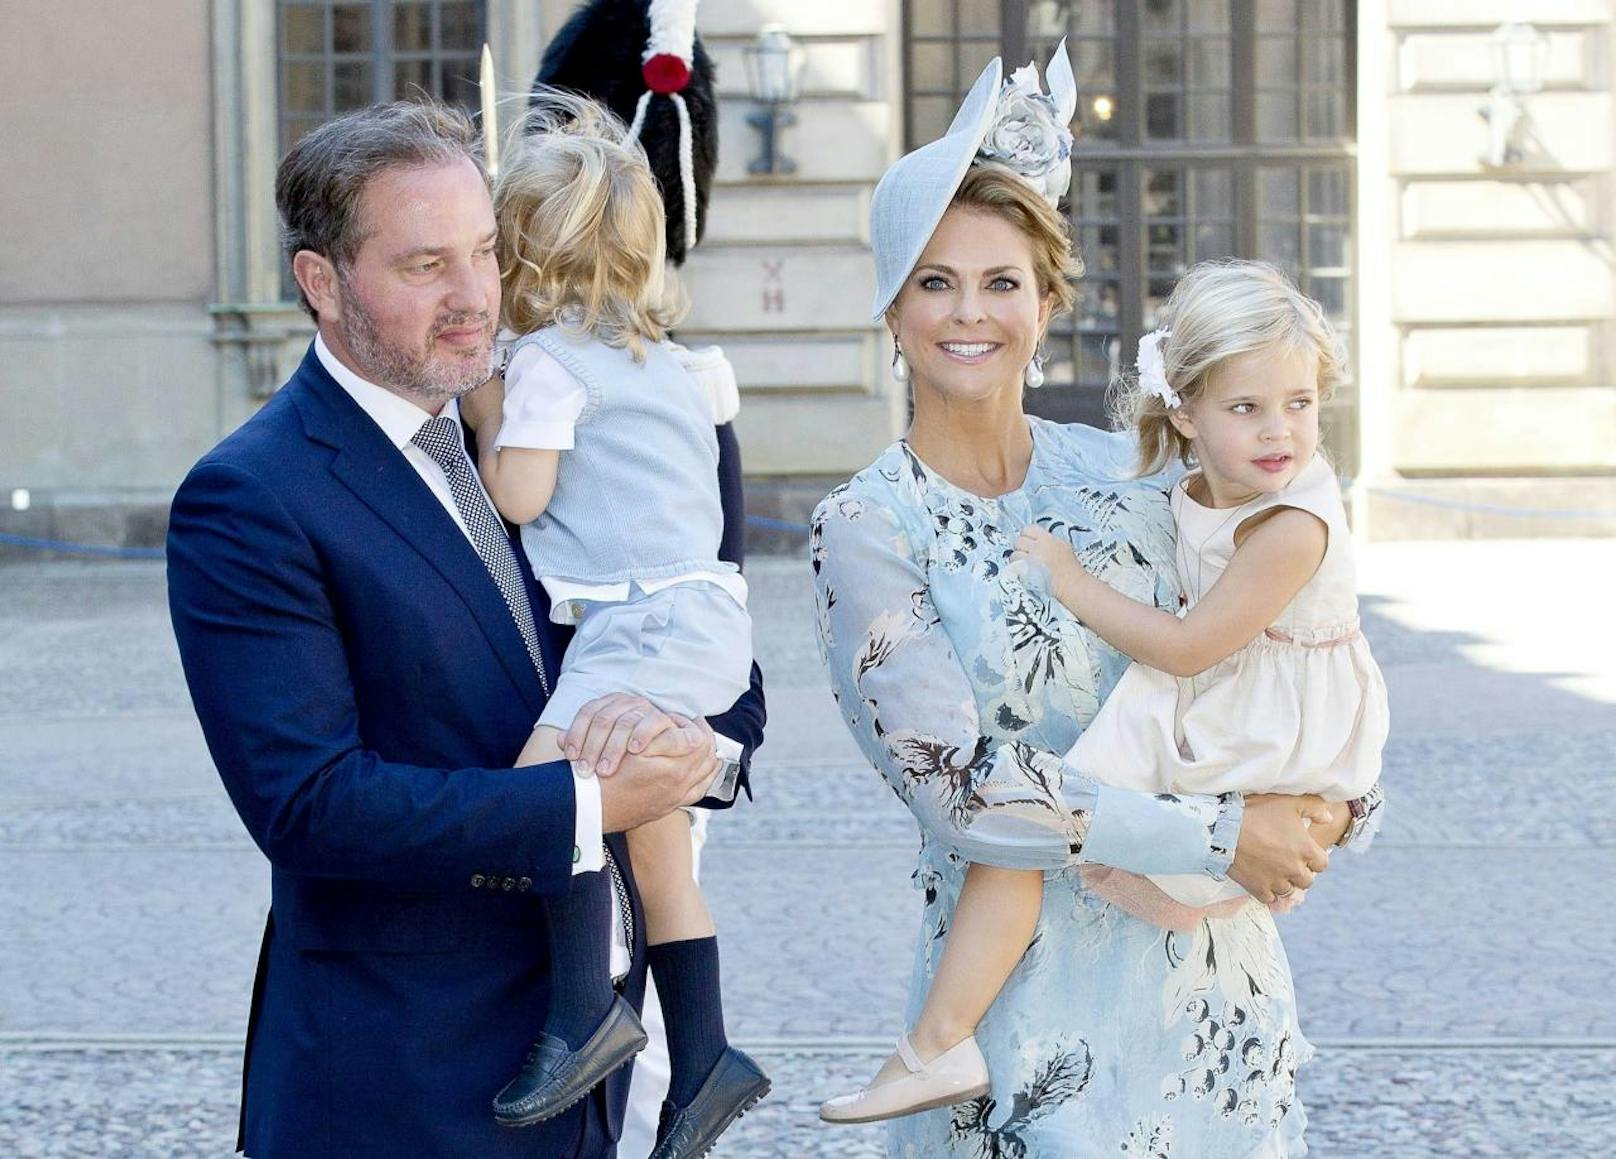 14-07-2017 Stockholm Princess Victoria and Prince Daniel and Princess Estelle and Prince Oscar and King Carl Gustaf and Queen Silvia and Prince Carl Philip and Princess Sofia and Prince Alexander and Princess Madeleine and Christopher O Neill and Princess Leonore and Prince Nicolas during the festivities for the crown princess her 40th birthday at the royal palace in Stockholm, Sweden. PUBLICATIONxINxGERxSUIxAUTxONLY Copyright: xPPE/NIEBOERx

14 07 2017 Stockholm Princess Victoria and Prince Daniel and Princess Estelle and Prince Oscar and King Carl Gustaf and Queen Silvia and Prince Carl Philip and Princess Sofia and Prince Alexander and Princess Madeleine and Christopher O Neill and Princess Leonora and Prince Nicolas during The Festivities for The Crown Princess her 40th Birthday AT The Royal Palace in Stockholm Sweden PUBLICATIONxINxGERxSUIxAUTxONLY Copyright xPPE NIEBOERx  